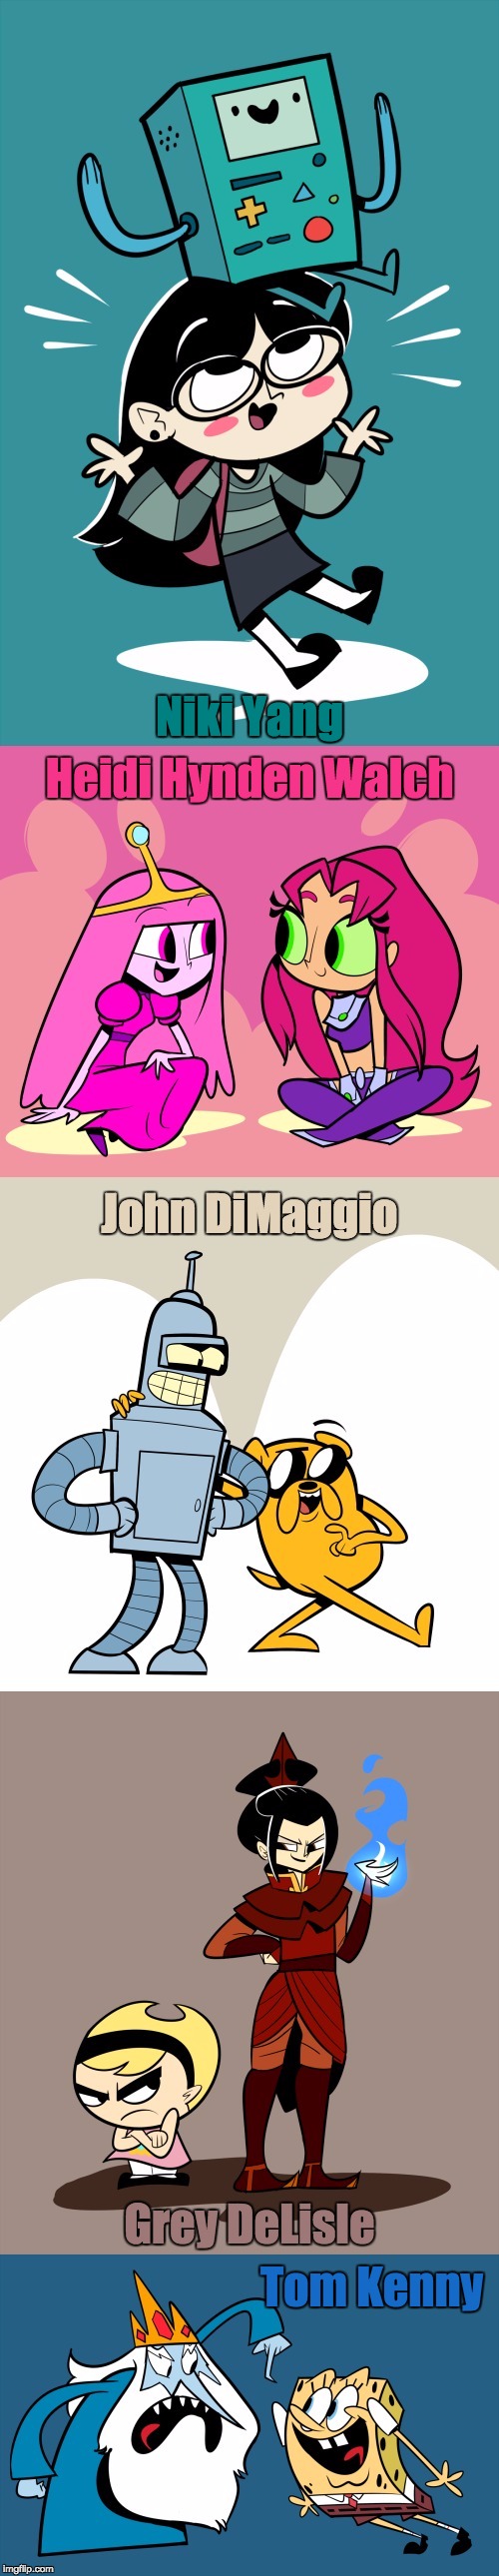 Characters Voiced By The Same VAs Meet Each Other | Niki Yang; Heidi Hynden Walch; John DiMaggio; Grey DeLisle; Tom Kenny | image tagged in memes,cartoon week,juicydeath1025,voice actors,funny,talent | made w/ Imgflip meme maker